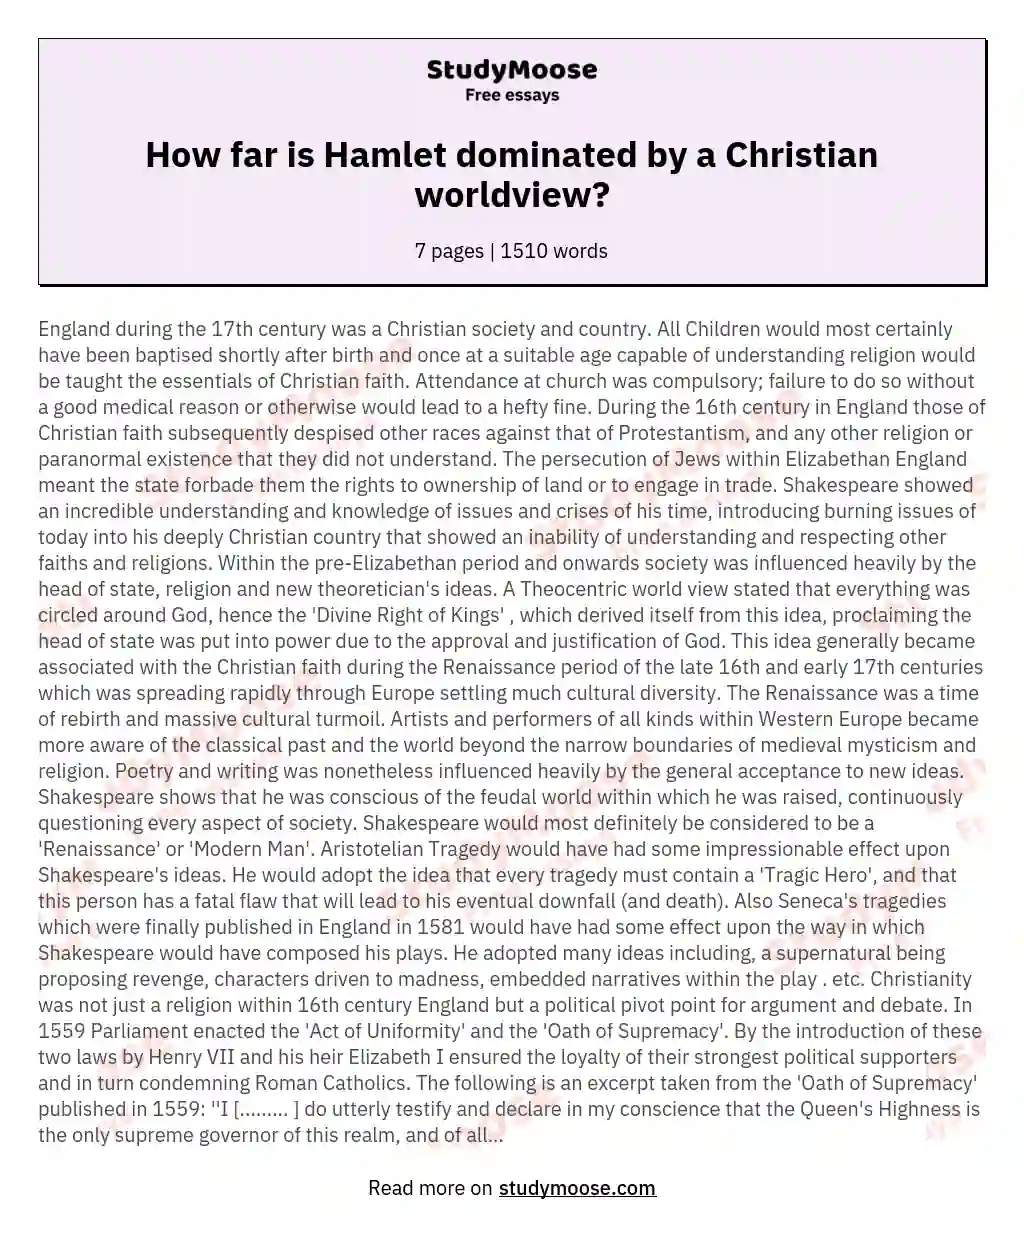 How far is Hamlet dominated by a Christian worldview? essay